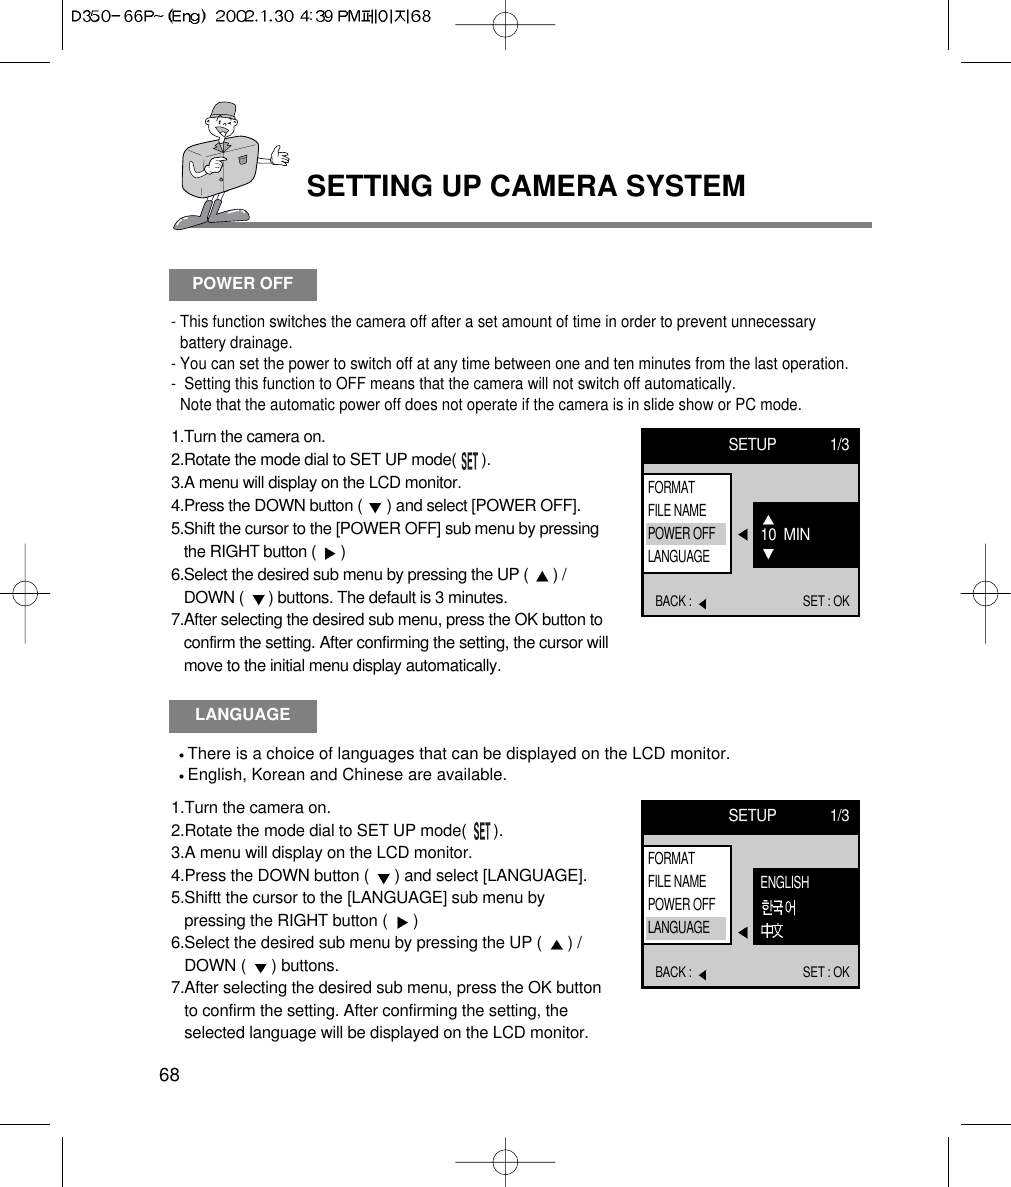 SETTING UP CAMERA SYSTEM68LANGUAGEThere is a choice of languages that can be displayed on the LCD monitor.English, Korean and Chinese are available.1.Turn the camera on.2.Rotate the mode dial to SET UP mode(      ).3.A menu will display on the LCD monitor.4.Press the DOWN button (  ) and select [LANGUAGE].5.Shiftt the cursor to the [LANGUAGE] sub menu bypressing the RIGHT button (  ) 6.Select the desired sub menu by pressing the UP (  ) /DOWN (  ) buttons.7.After selecting the desired sub menu, press the OK buttonto confirm the setting. After confirming the setting, theselected language will be displayed on the LCD monitor.SETUP 1/3BACK :  SET : OKENGLISHFORMATFILE NAMEPOWER OFFLANGUAGEPOWER OFF- This function switches the camera off after a set amount of time in order to prevent unnecessarybattery drainage.- You can set the power to switch off at any time between one and ten minutes from the last operation.-  Setting this function to OFF means that the camera will not switch off automatically.Note that the automatic power off does not operate if the camera is in slide show or PC mode.1.Turn the camera on.2.Rotate the mode dial to SET UP mode(      ).3.A menu will display on the LCD monitor.4.Press the DOWN button (  ) and select [POWER OFF].5.Shift the cursor to the [POWER OFF] sub menu by pressingthe RIGHT button (  ) 6.Select the desired sub menu by pressing the UP (  ) /DOWN (  ) buttons. The default is 3 minutes.7.After selecting the desired sub menu, press the OK button toconfirm the setting. After confirming the setting, the cursor willmove to the initial menu display automatically.SETUP 1/3BACK :  SET : OK10  MINFORMATFILE NAMEPOWER OFFLANGUAGE